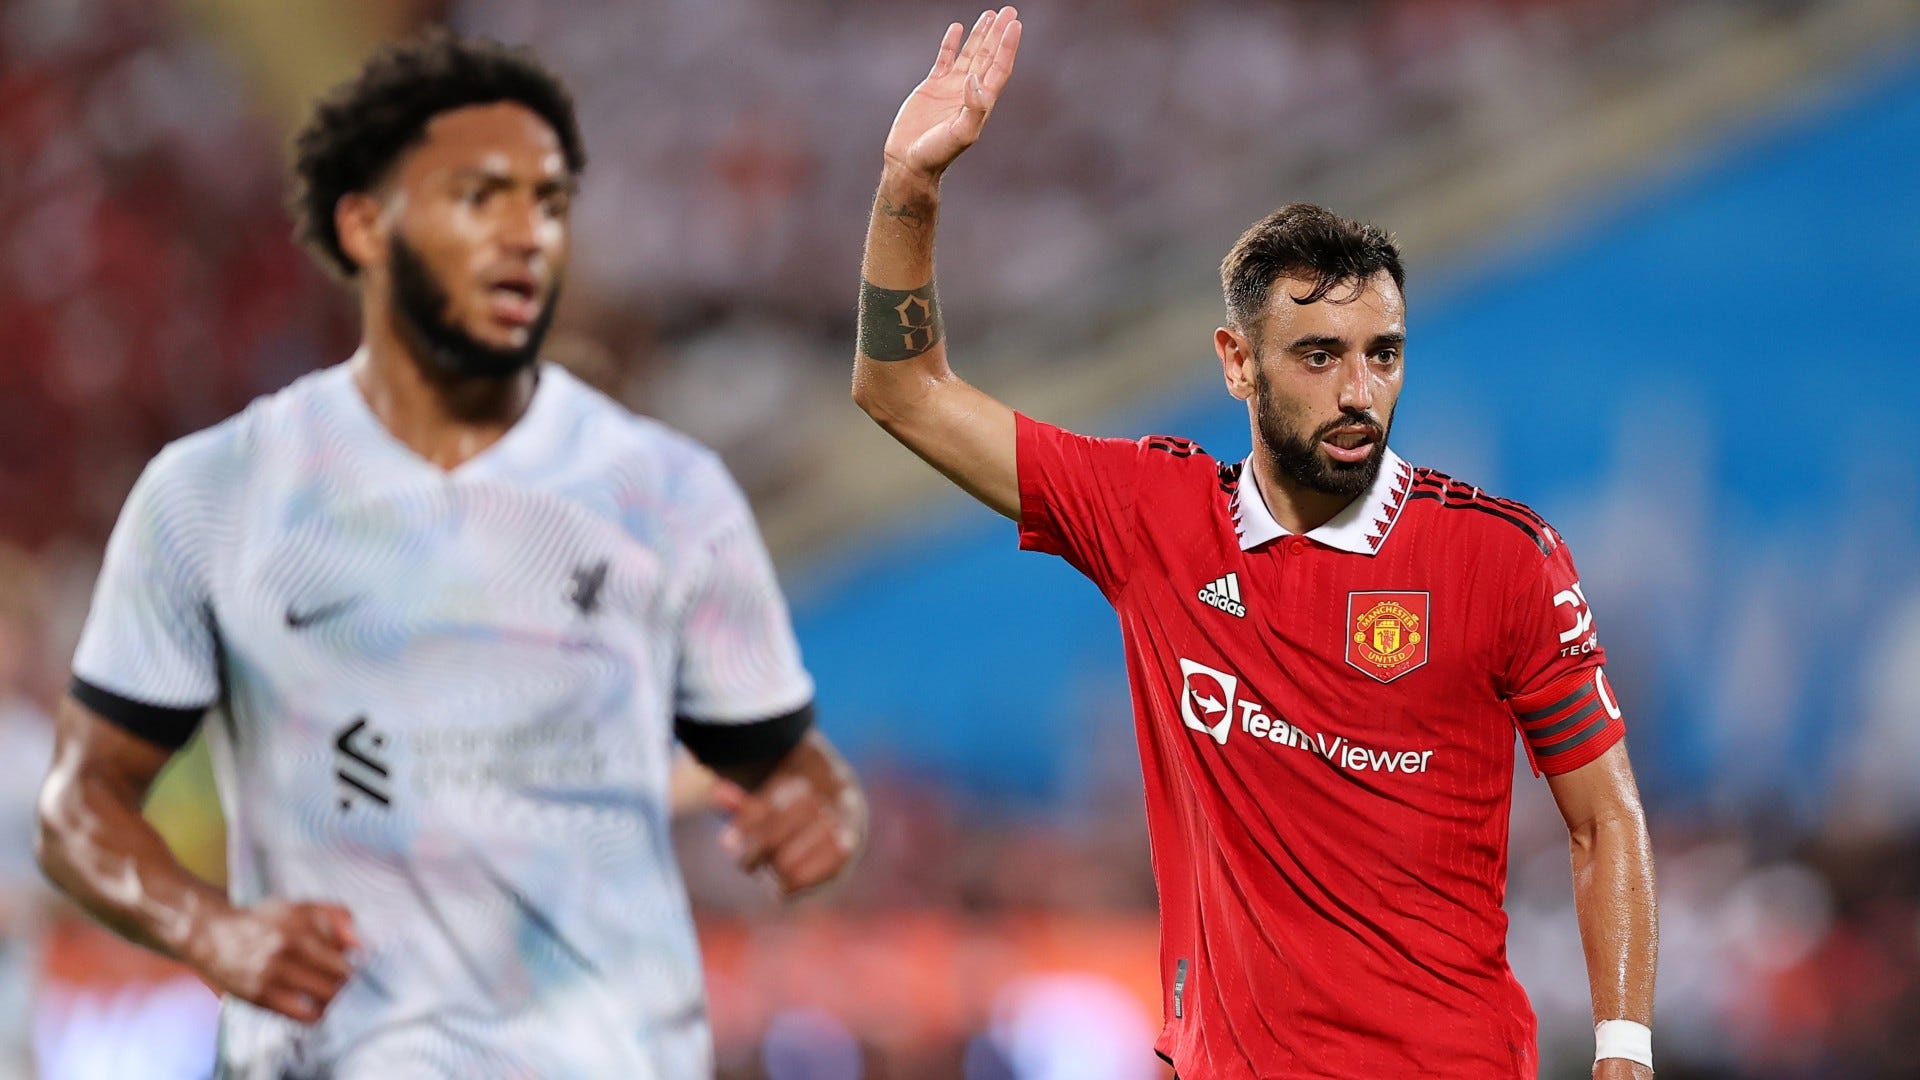 Man Utd vs Liverpool Live stream, TV channel, kick-off time and how to watch Goal English Bahrain